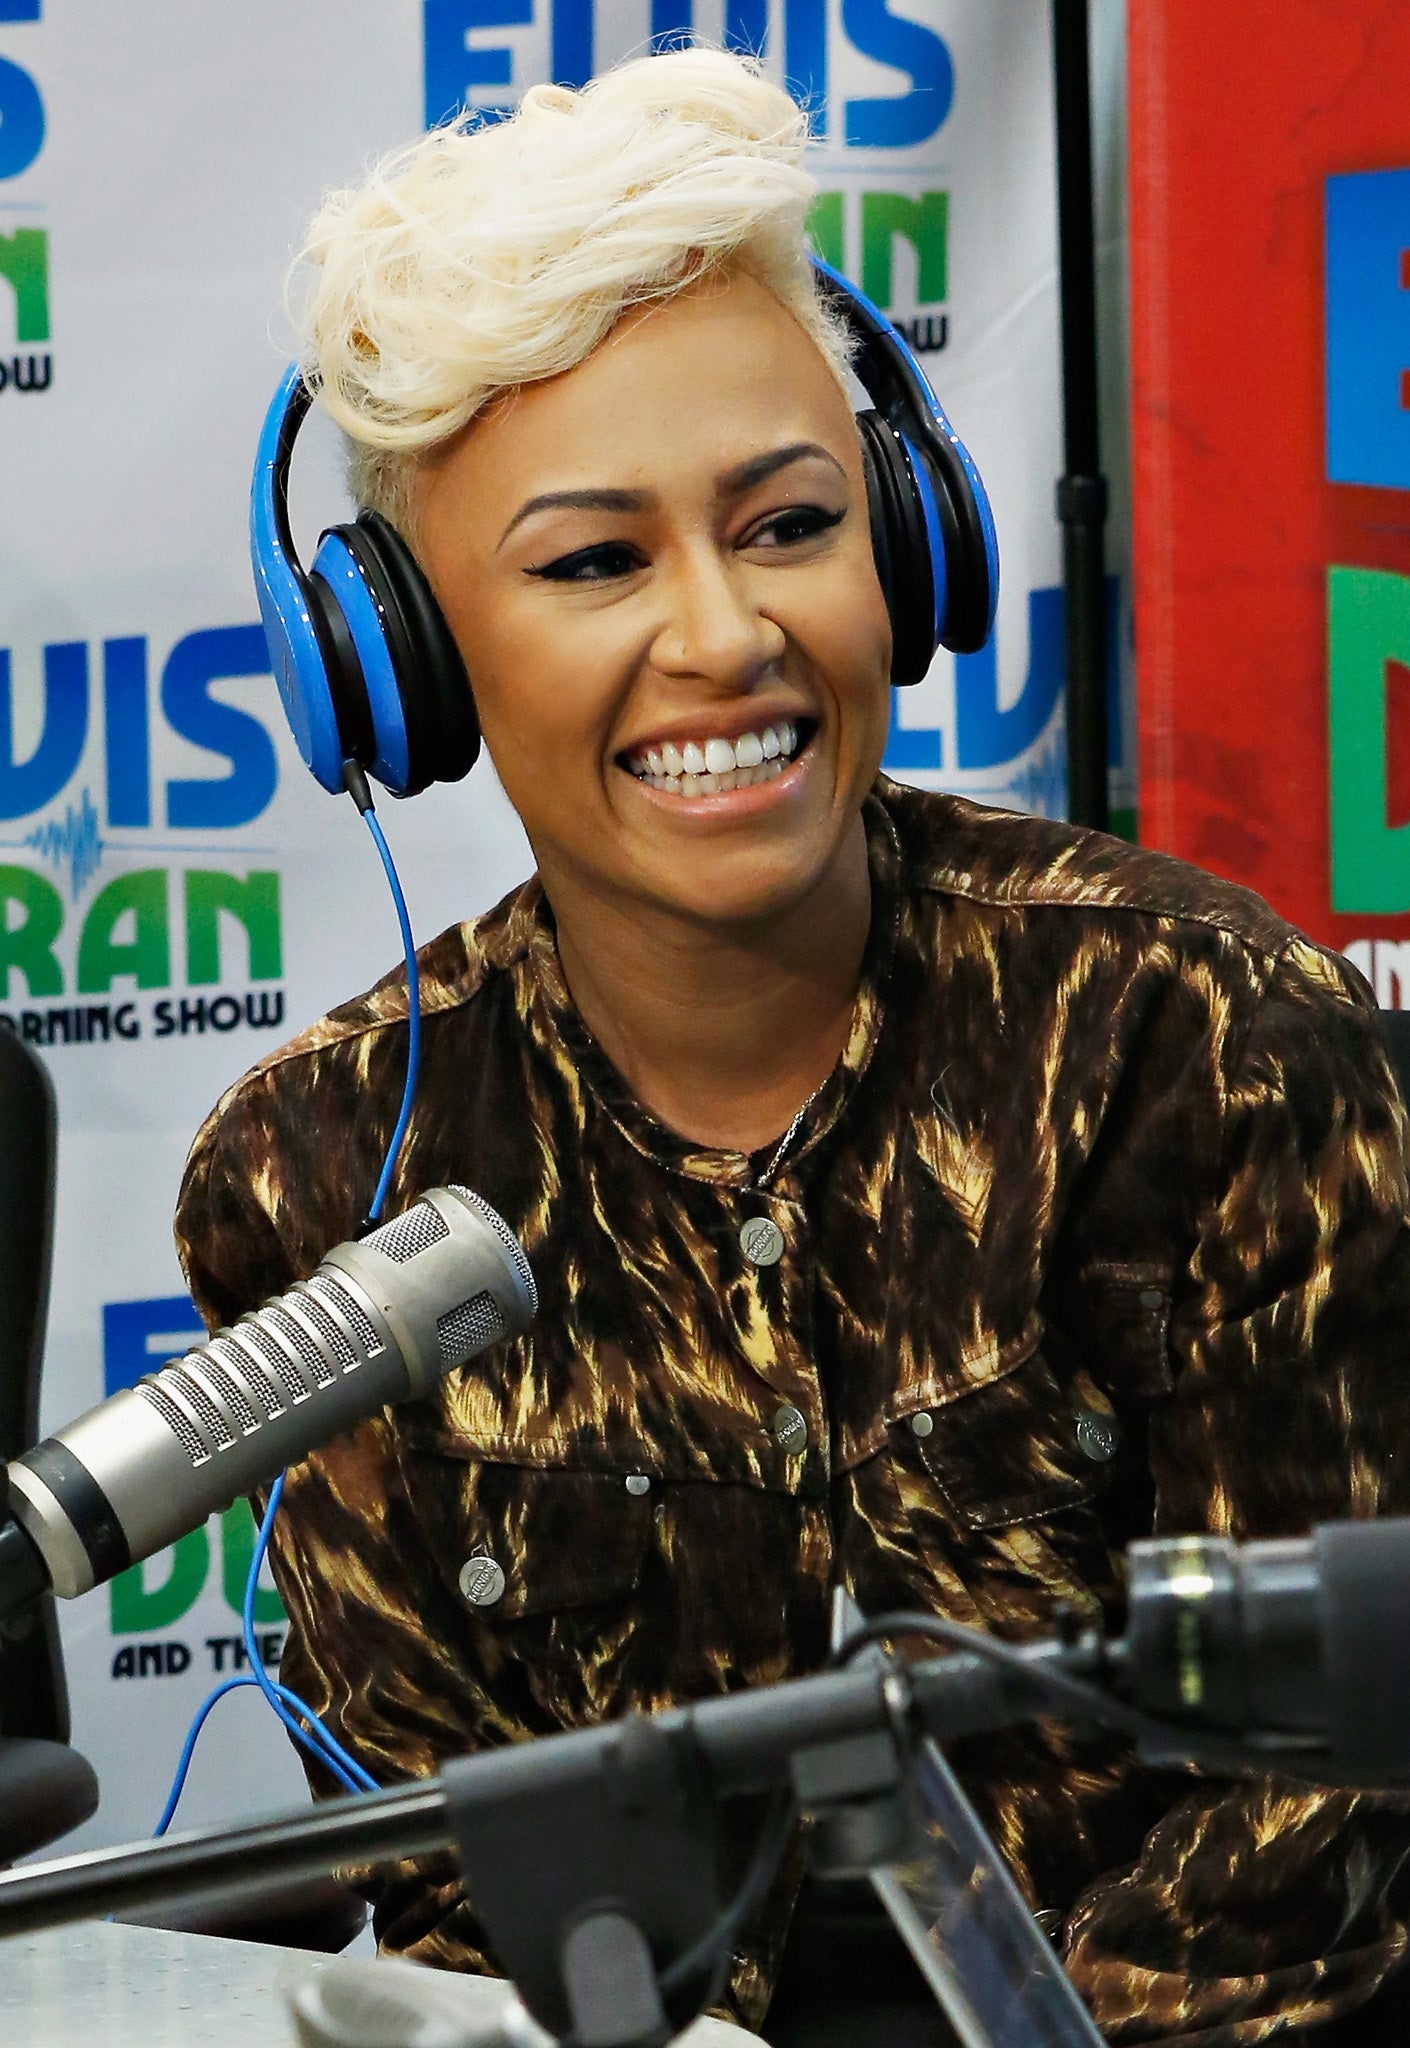 Emeli Sandé has broken an album sales record held by The Beatles for nearly 50 years